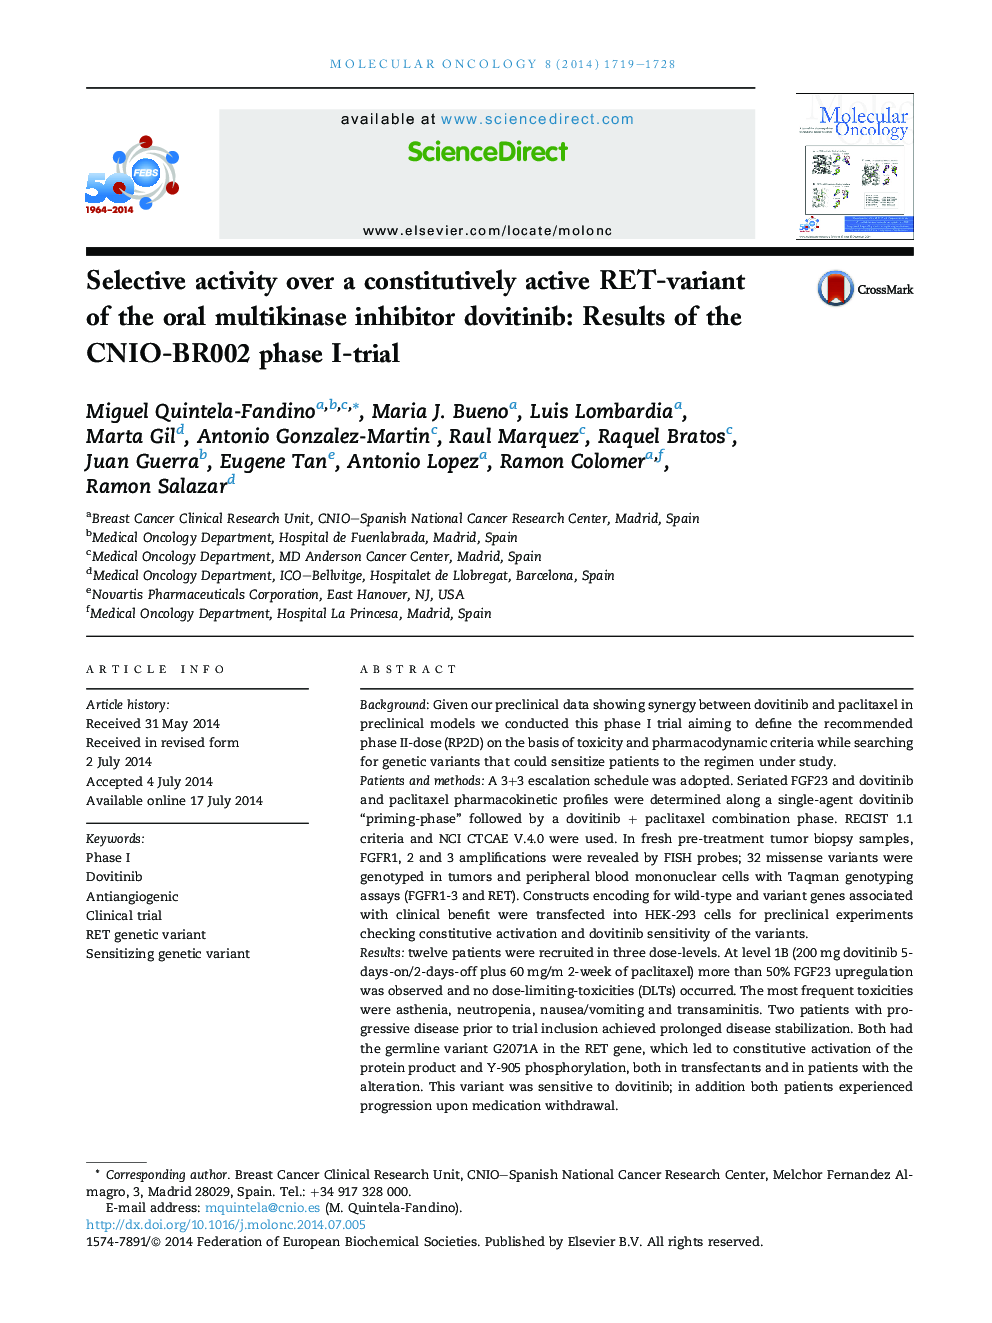 Selective activity over a constitutively active RET-variant of the oral multikinase inhibitor dovitinib: Results of the CNIO-BR002 phase I-trial